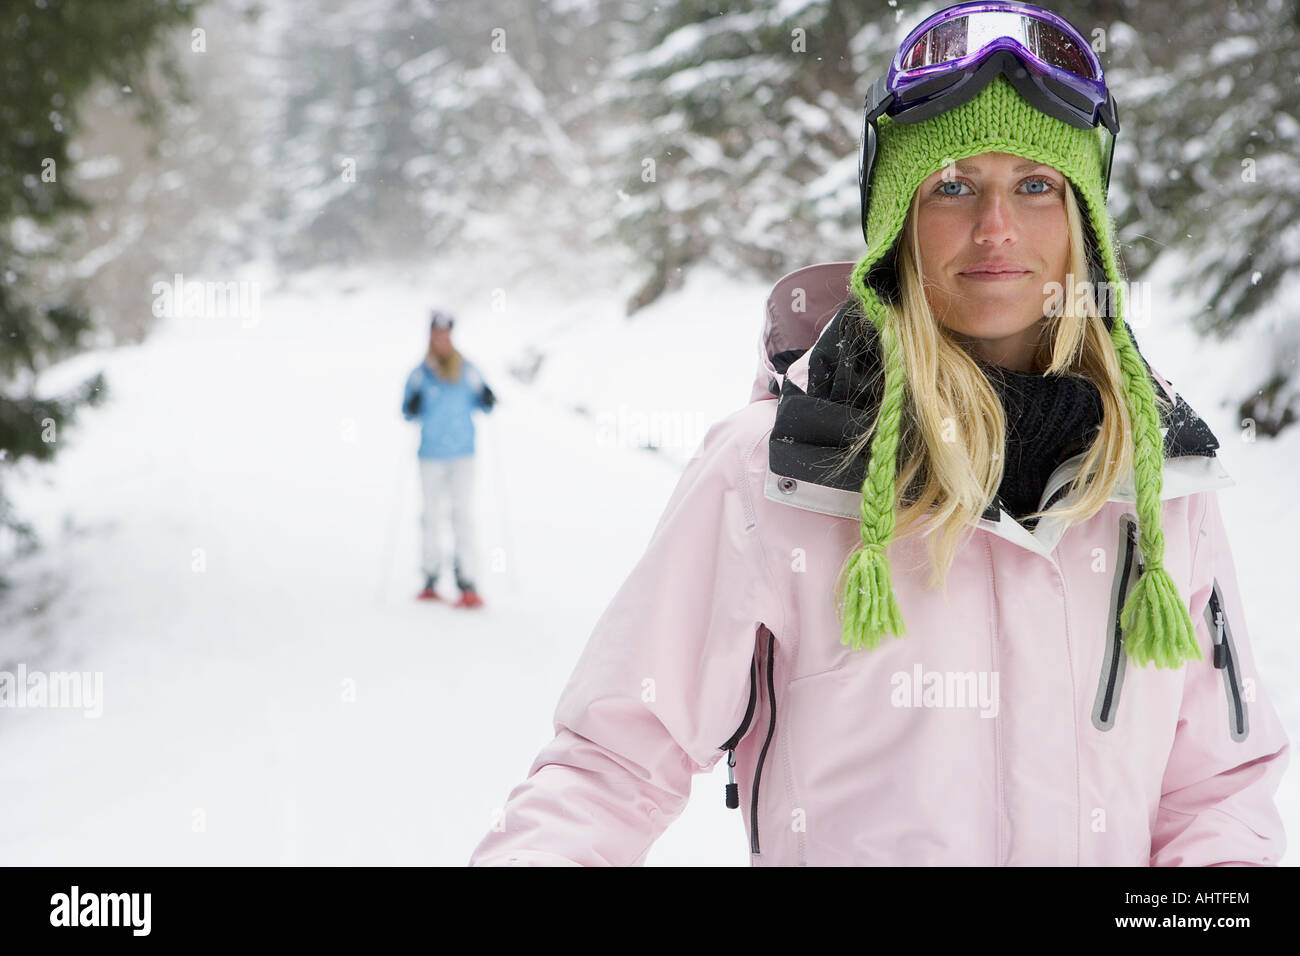 Smiling young woman on ski-slope, person in background, portrait Stock Photo